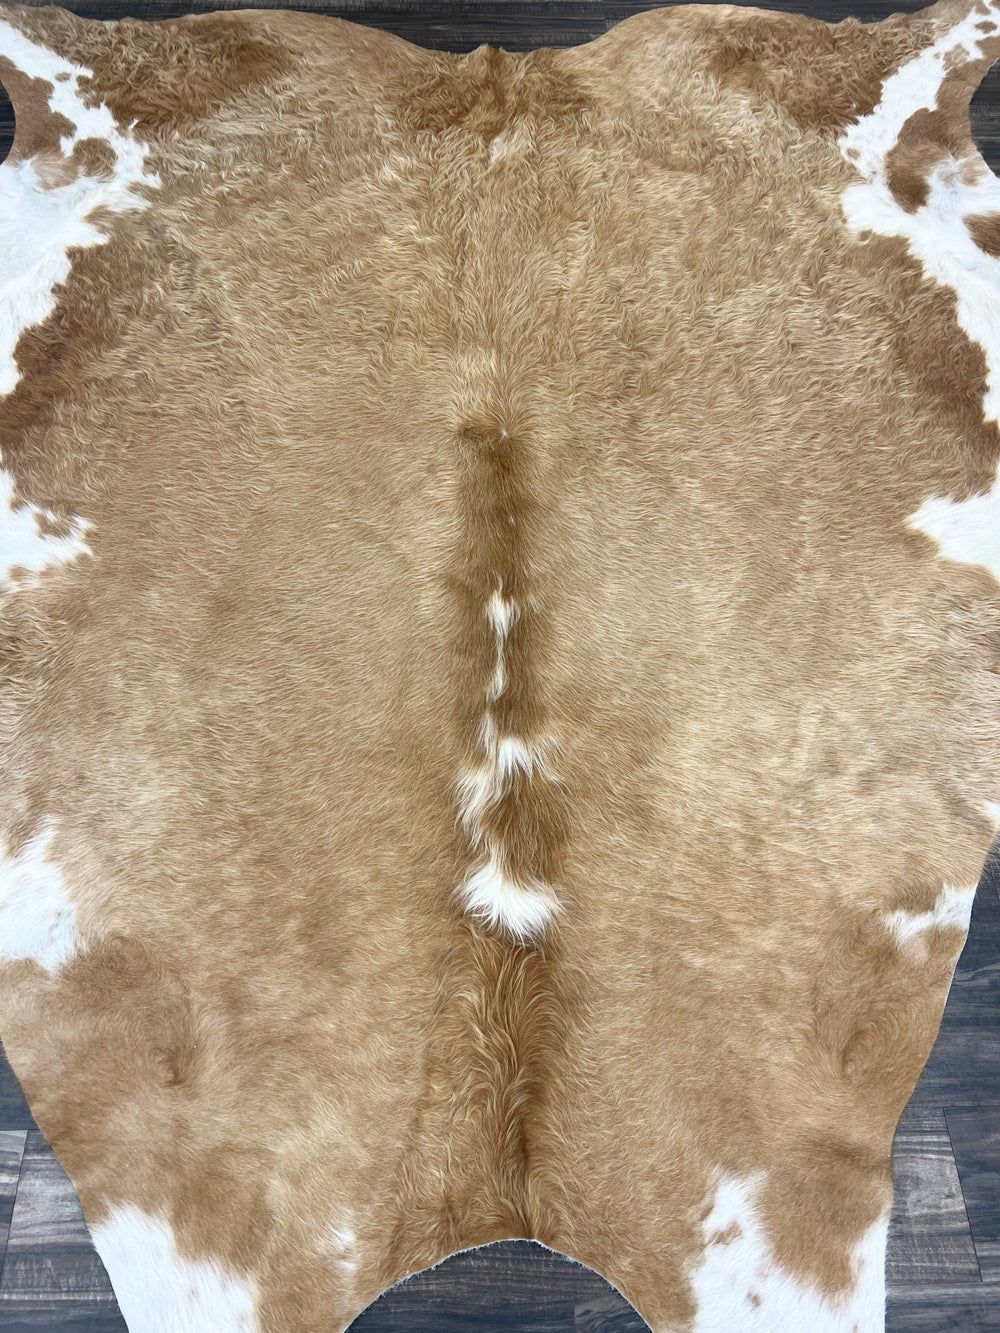 Brown and White Cowhide Rug XL - Rodeo Cowhide Rugs